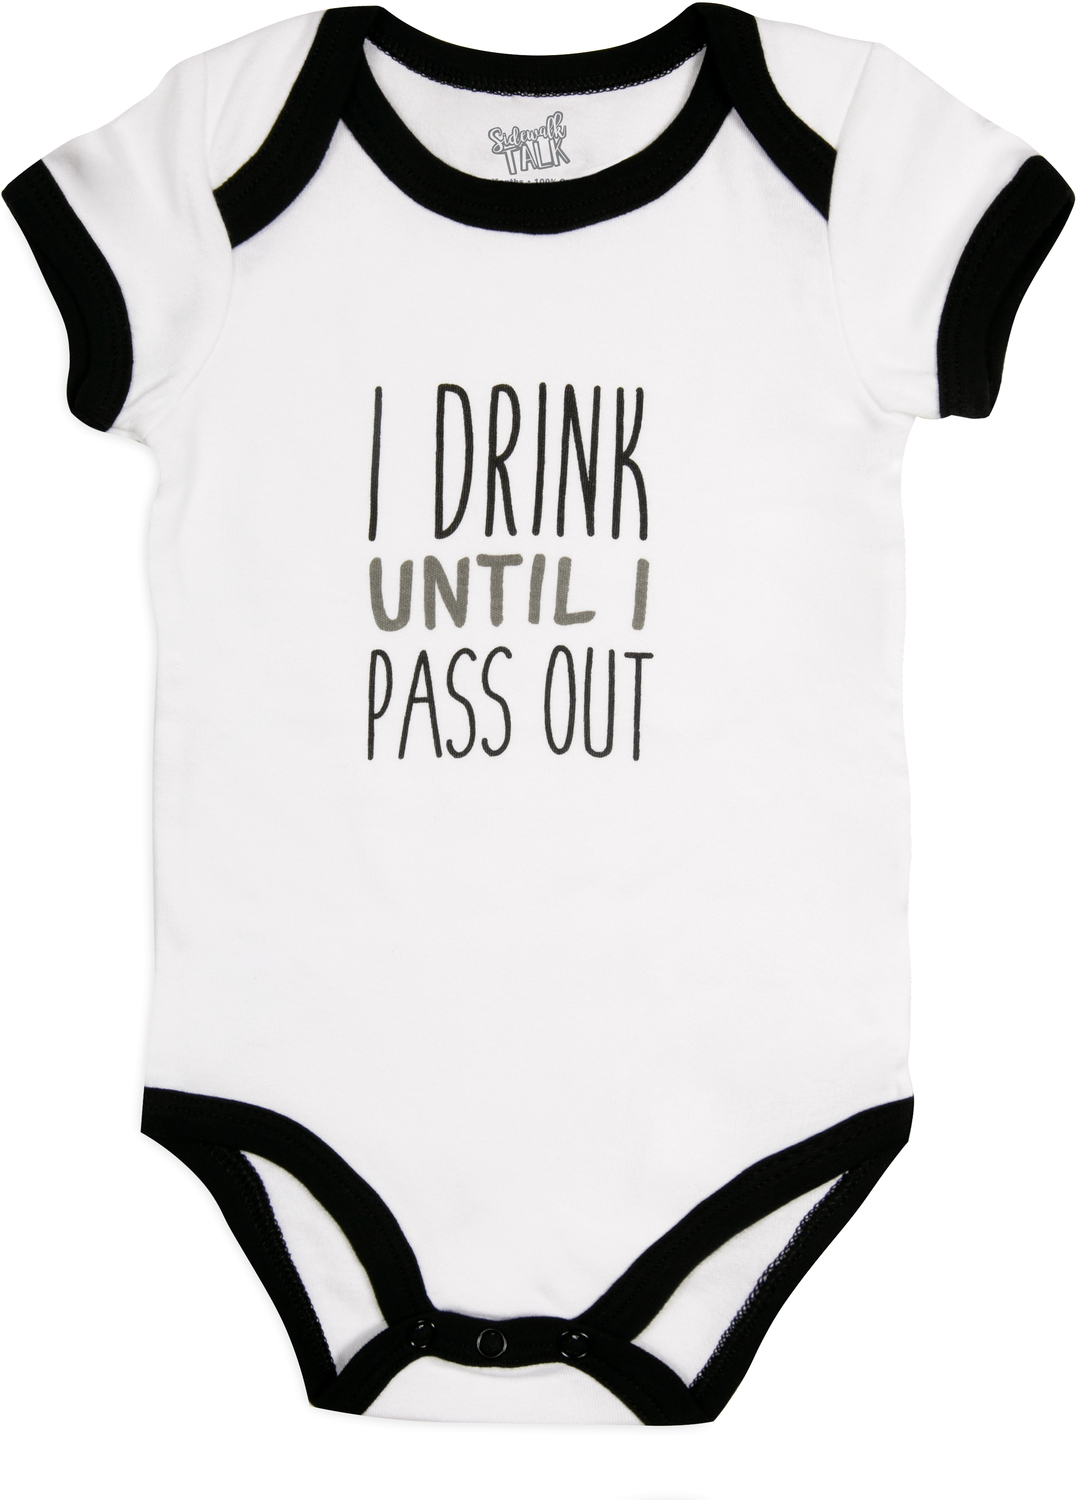 Pass Out by Sidewalk Talk - Pass Out - 12-24 Months
Black Trimmed Onesie